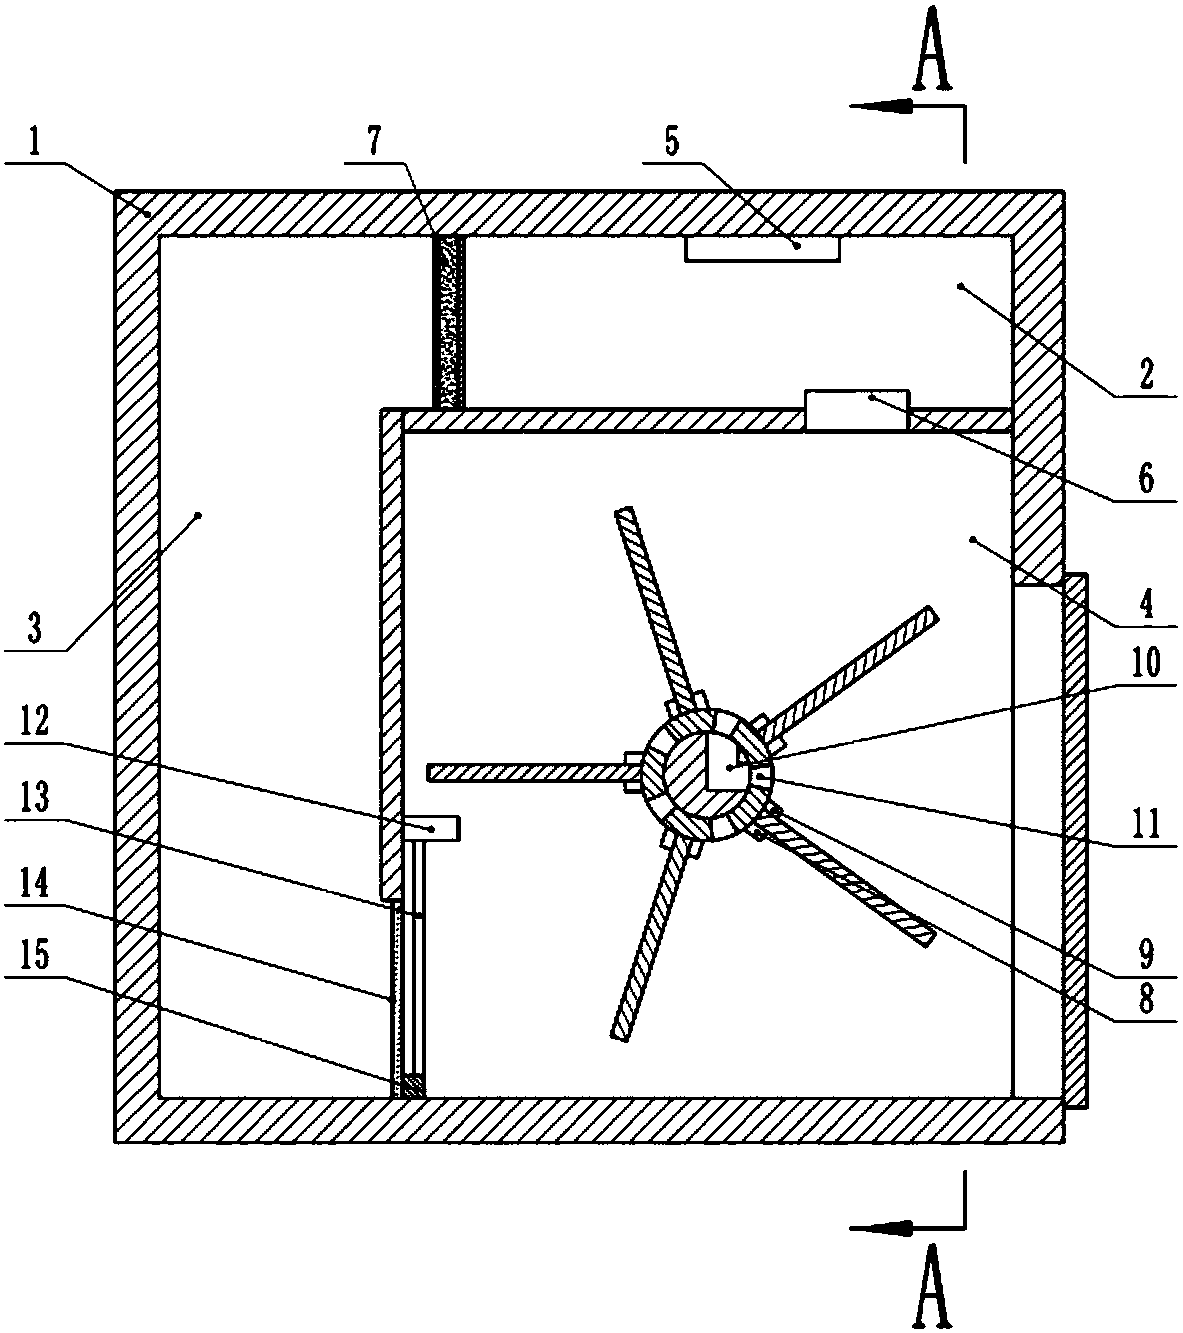 Wood material drying device